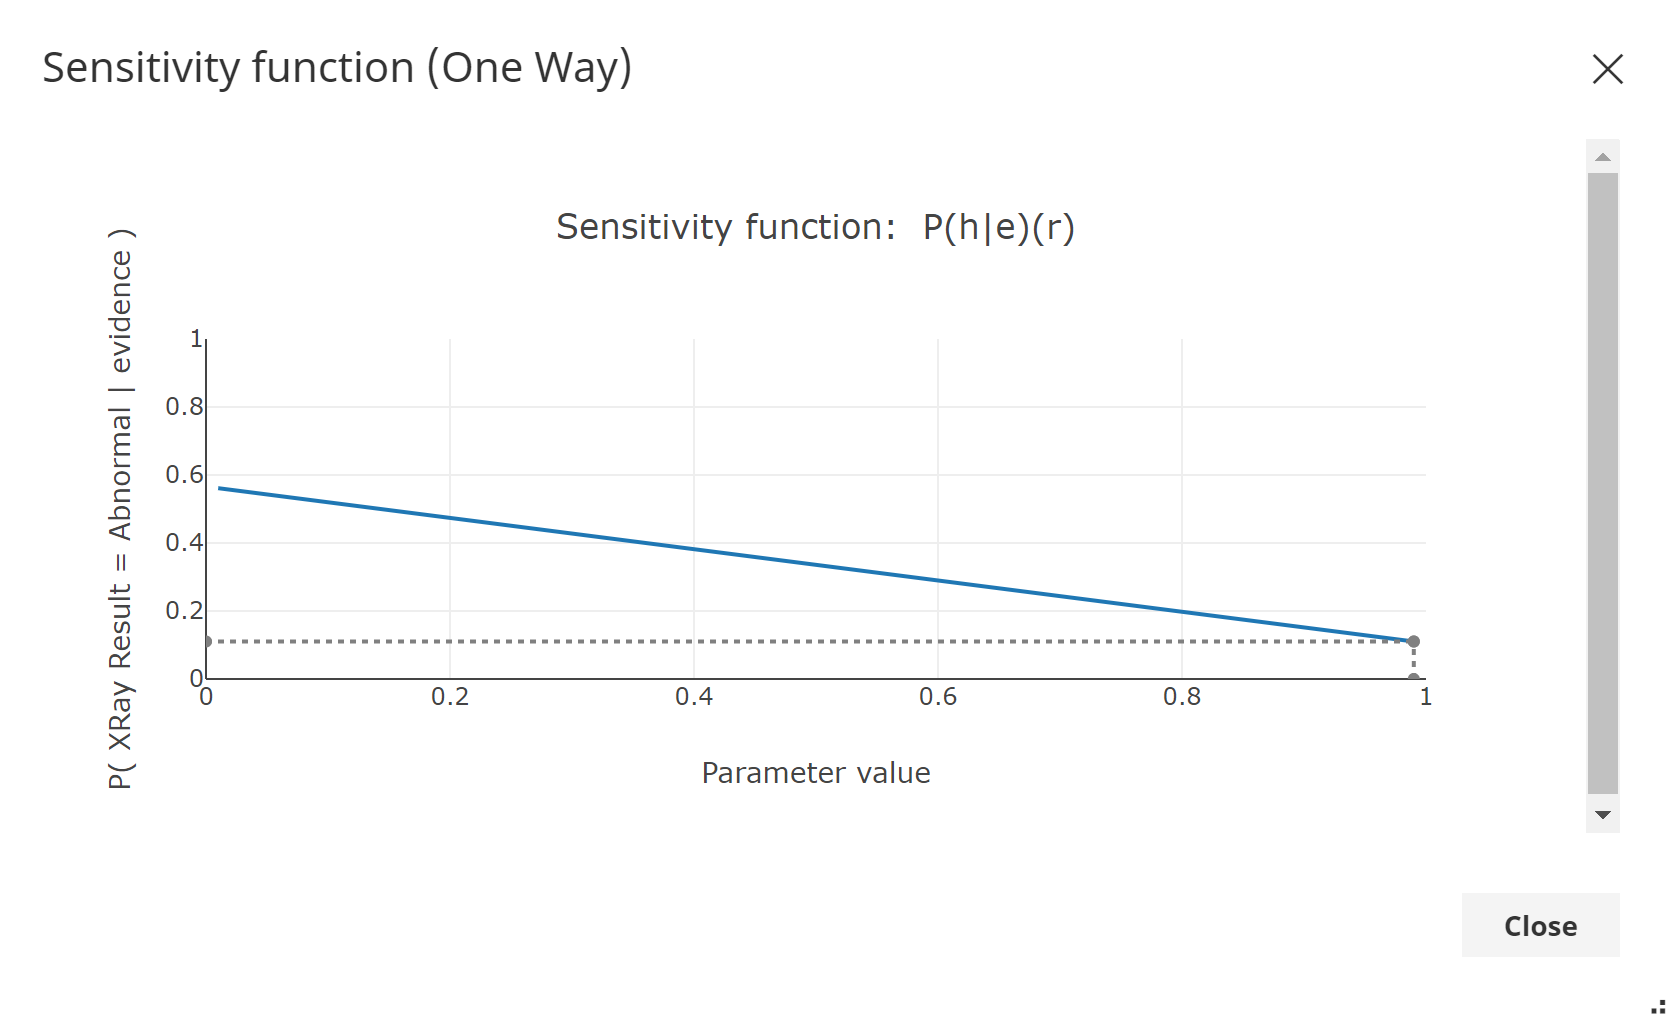 Sensitivity to parameters - one way - chart